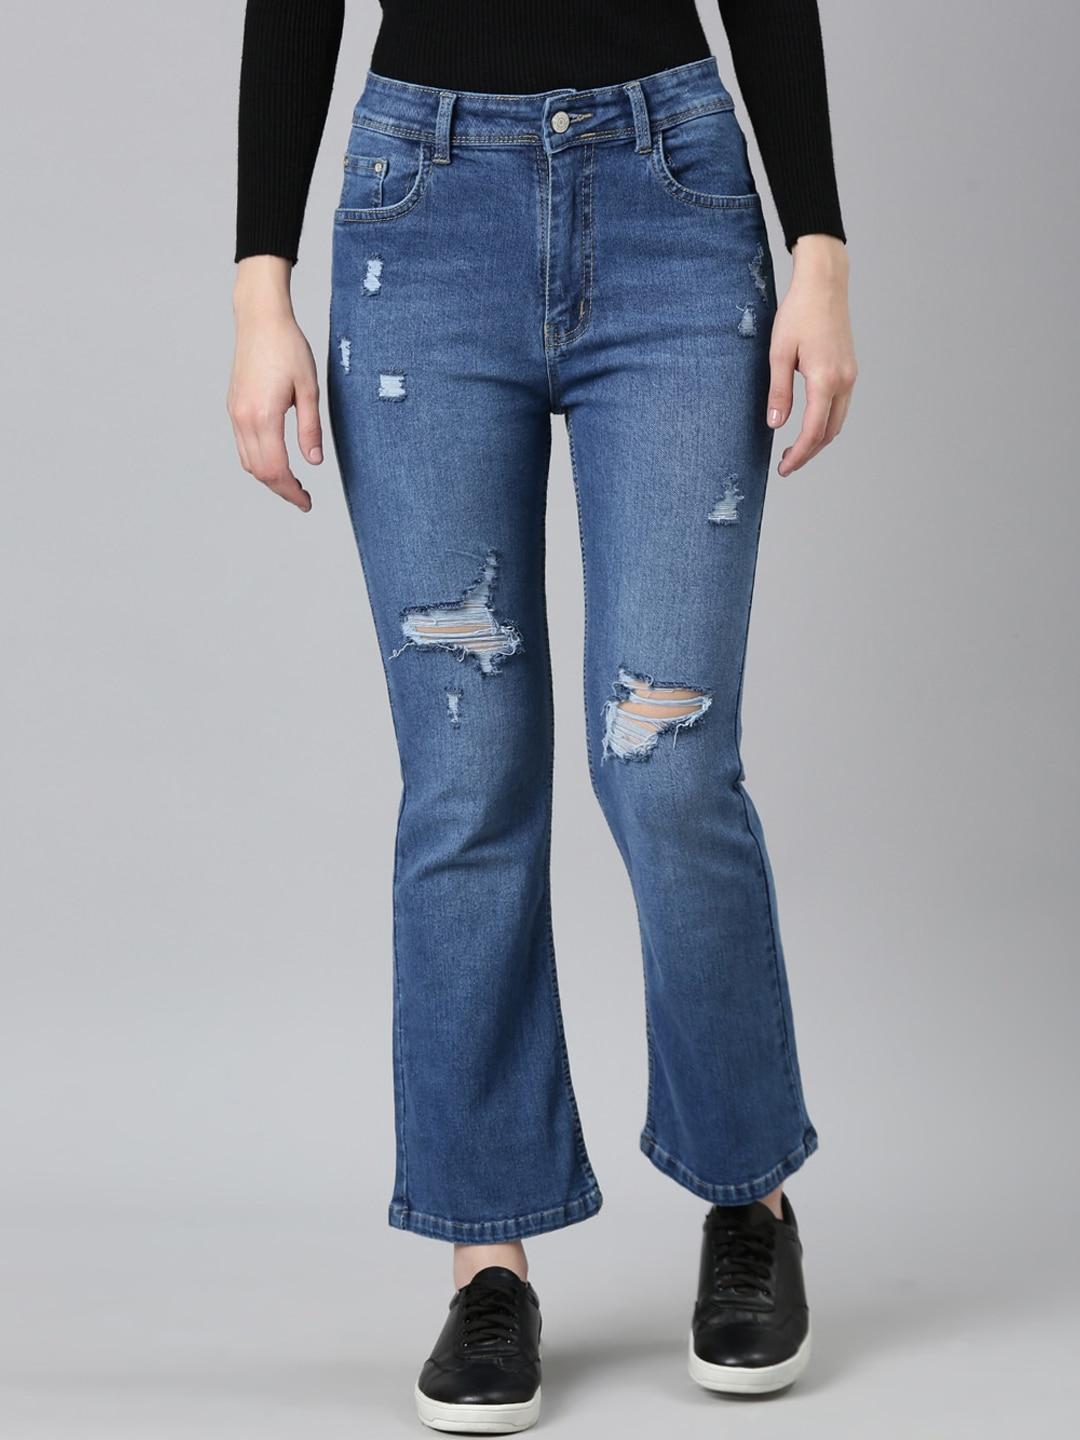 showoff-women-jean-bootcut-mildly-distressed-light-fade-acid-wash-stretchable-cotton-jeans